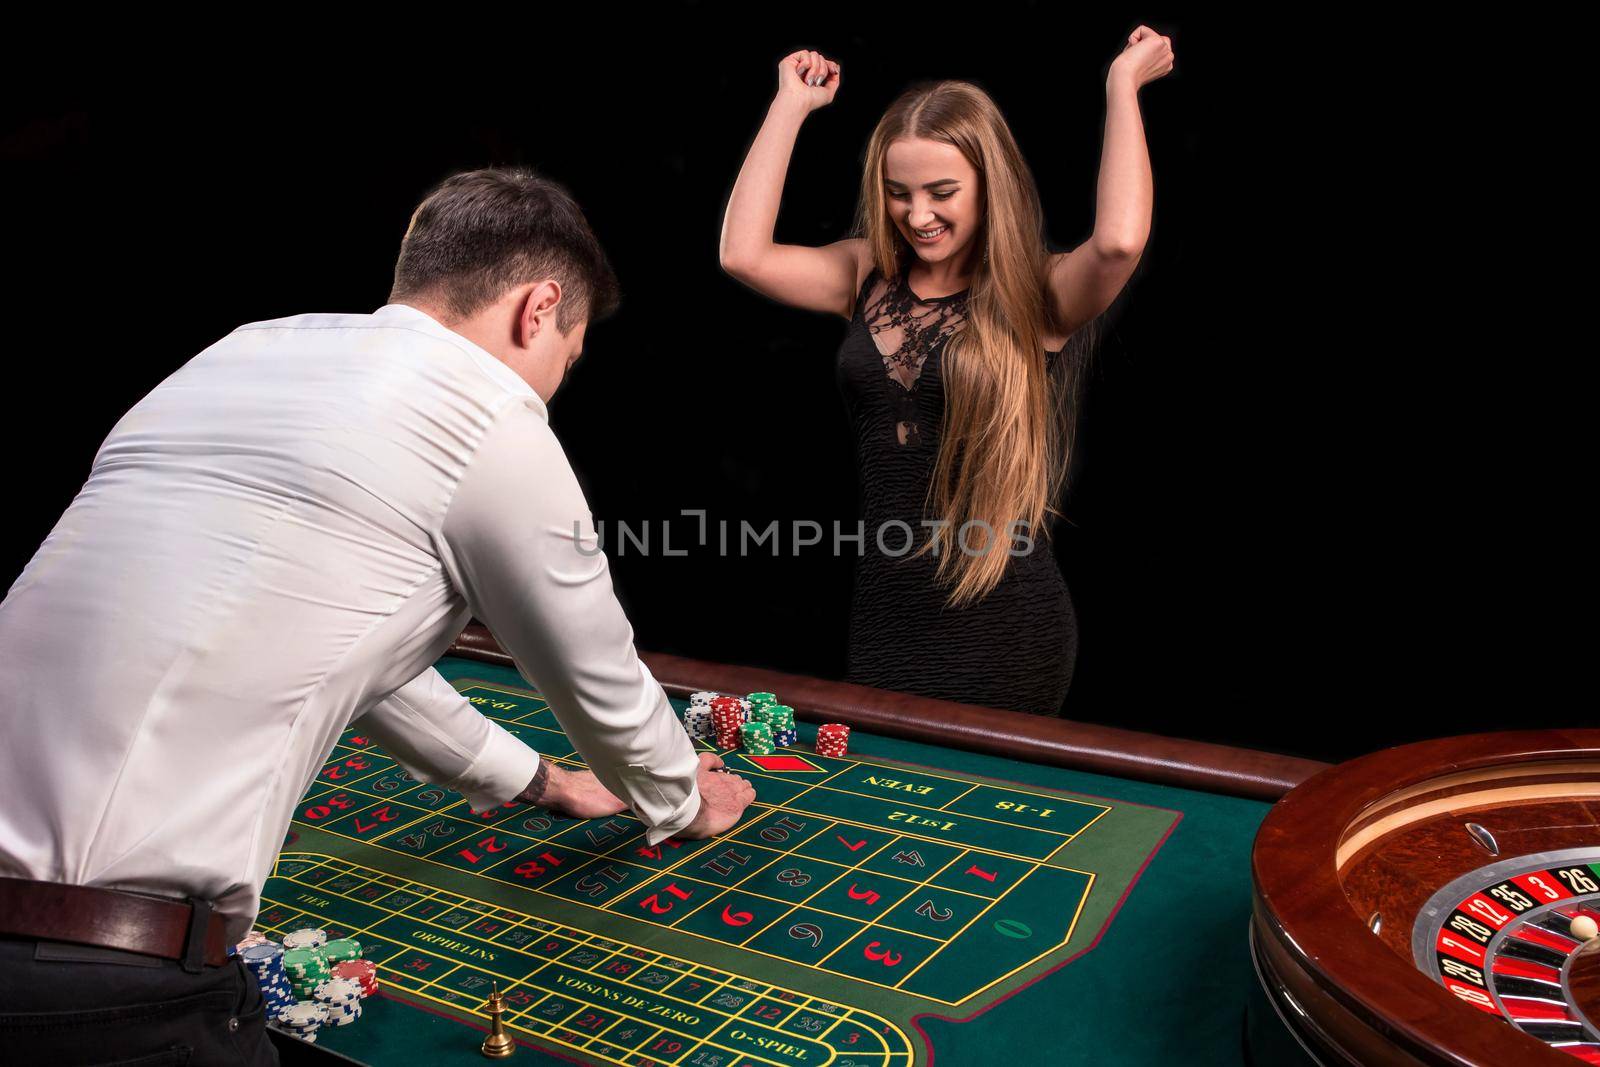 A close-up on the back of the croupier in a white shirt, image of green casino table with roulette and chips, a rich woman betting of gambling in the background by nazarovsergey